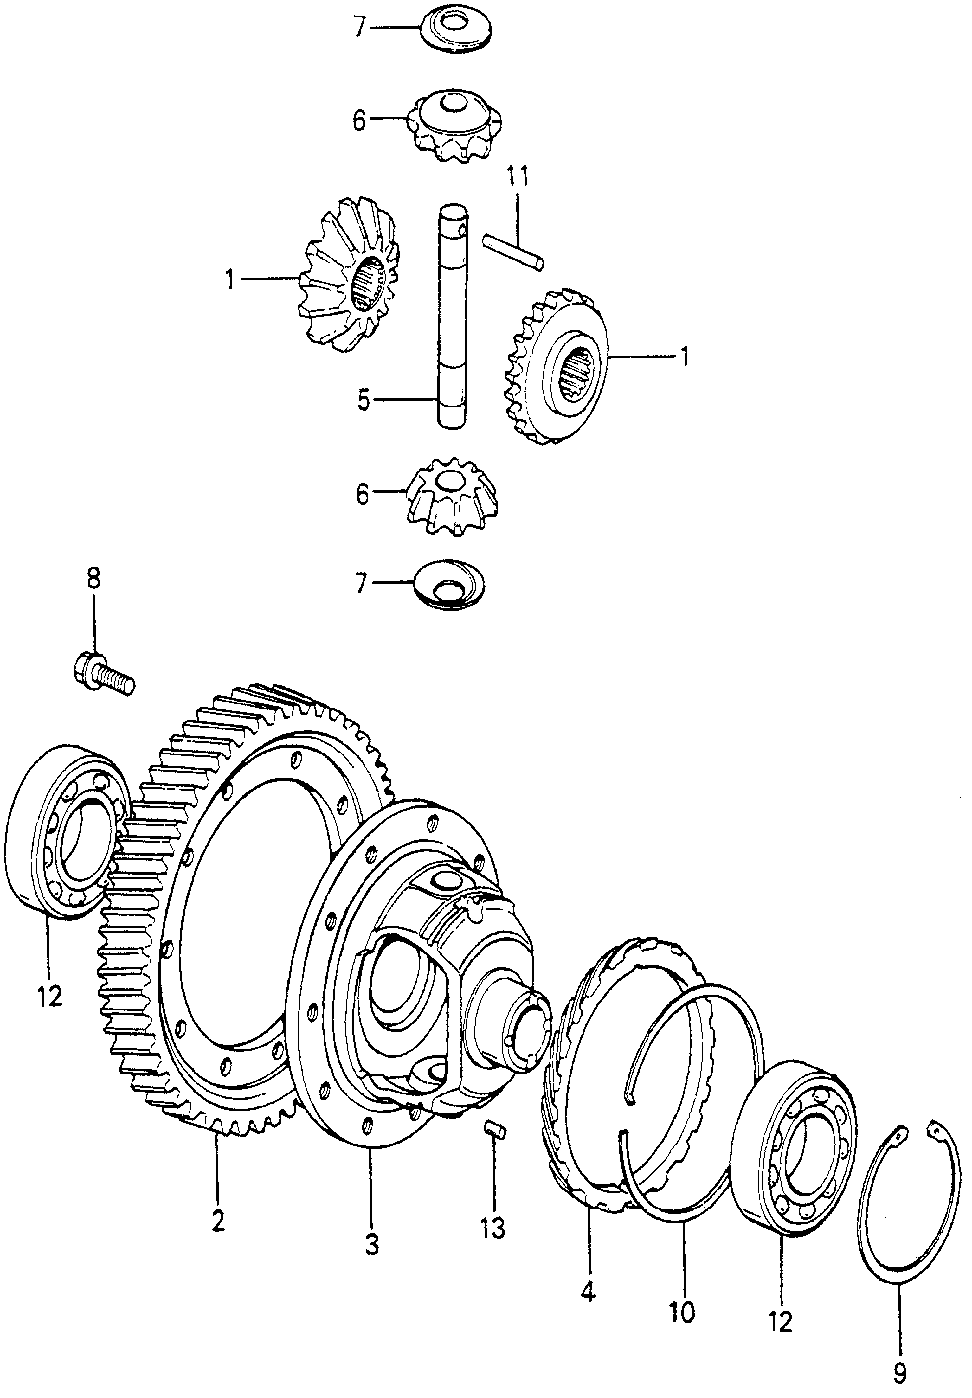 41221-PB7-000 - GEAR, DIFFERENTIAL SIDE